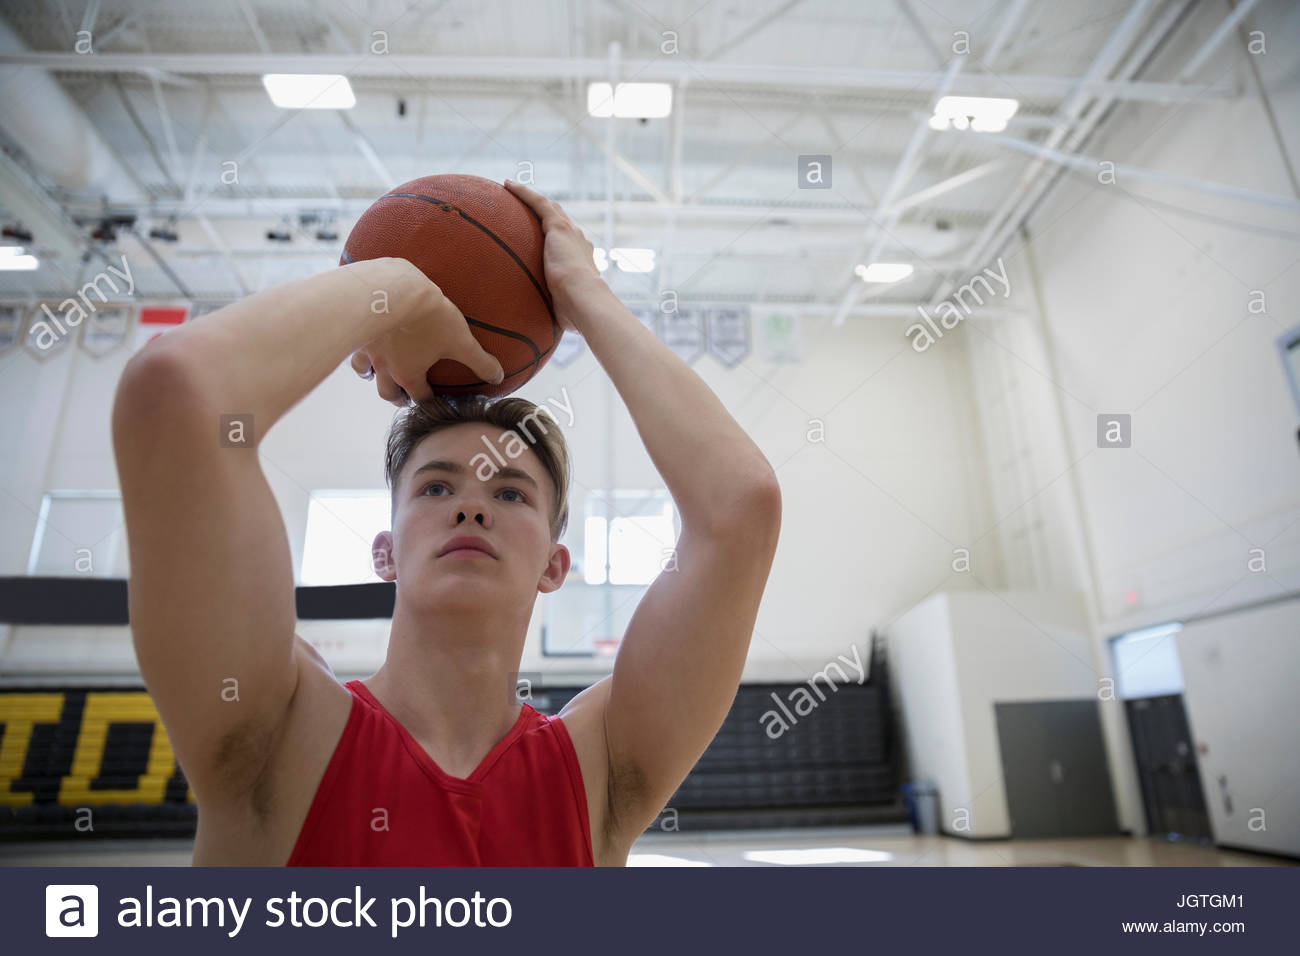 Focused male college basketball player shooting basketball in gymnasium Stock Photo